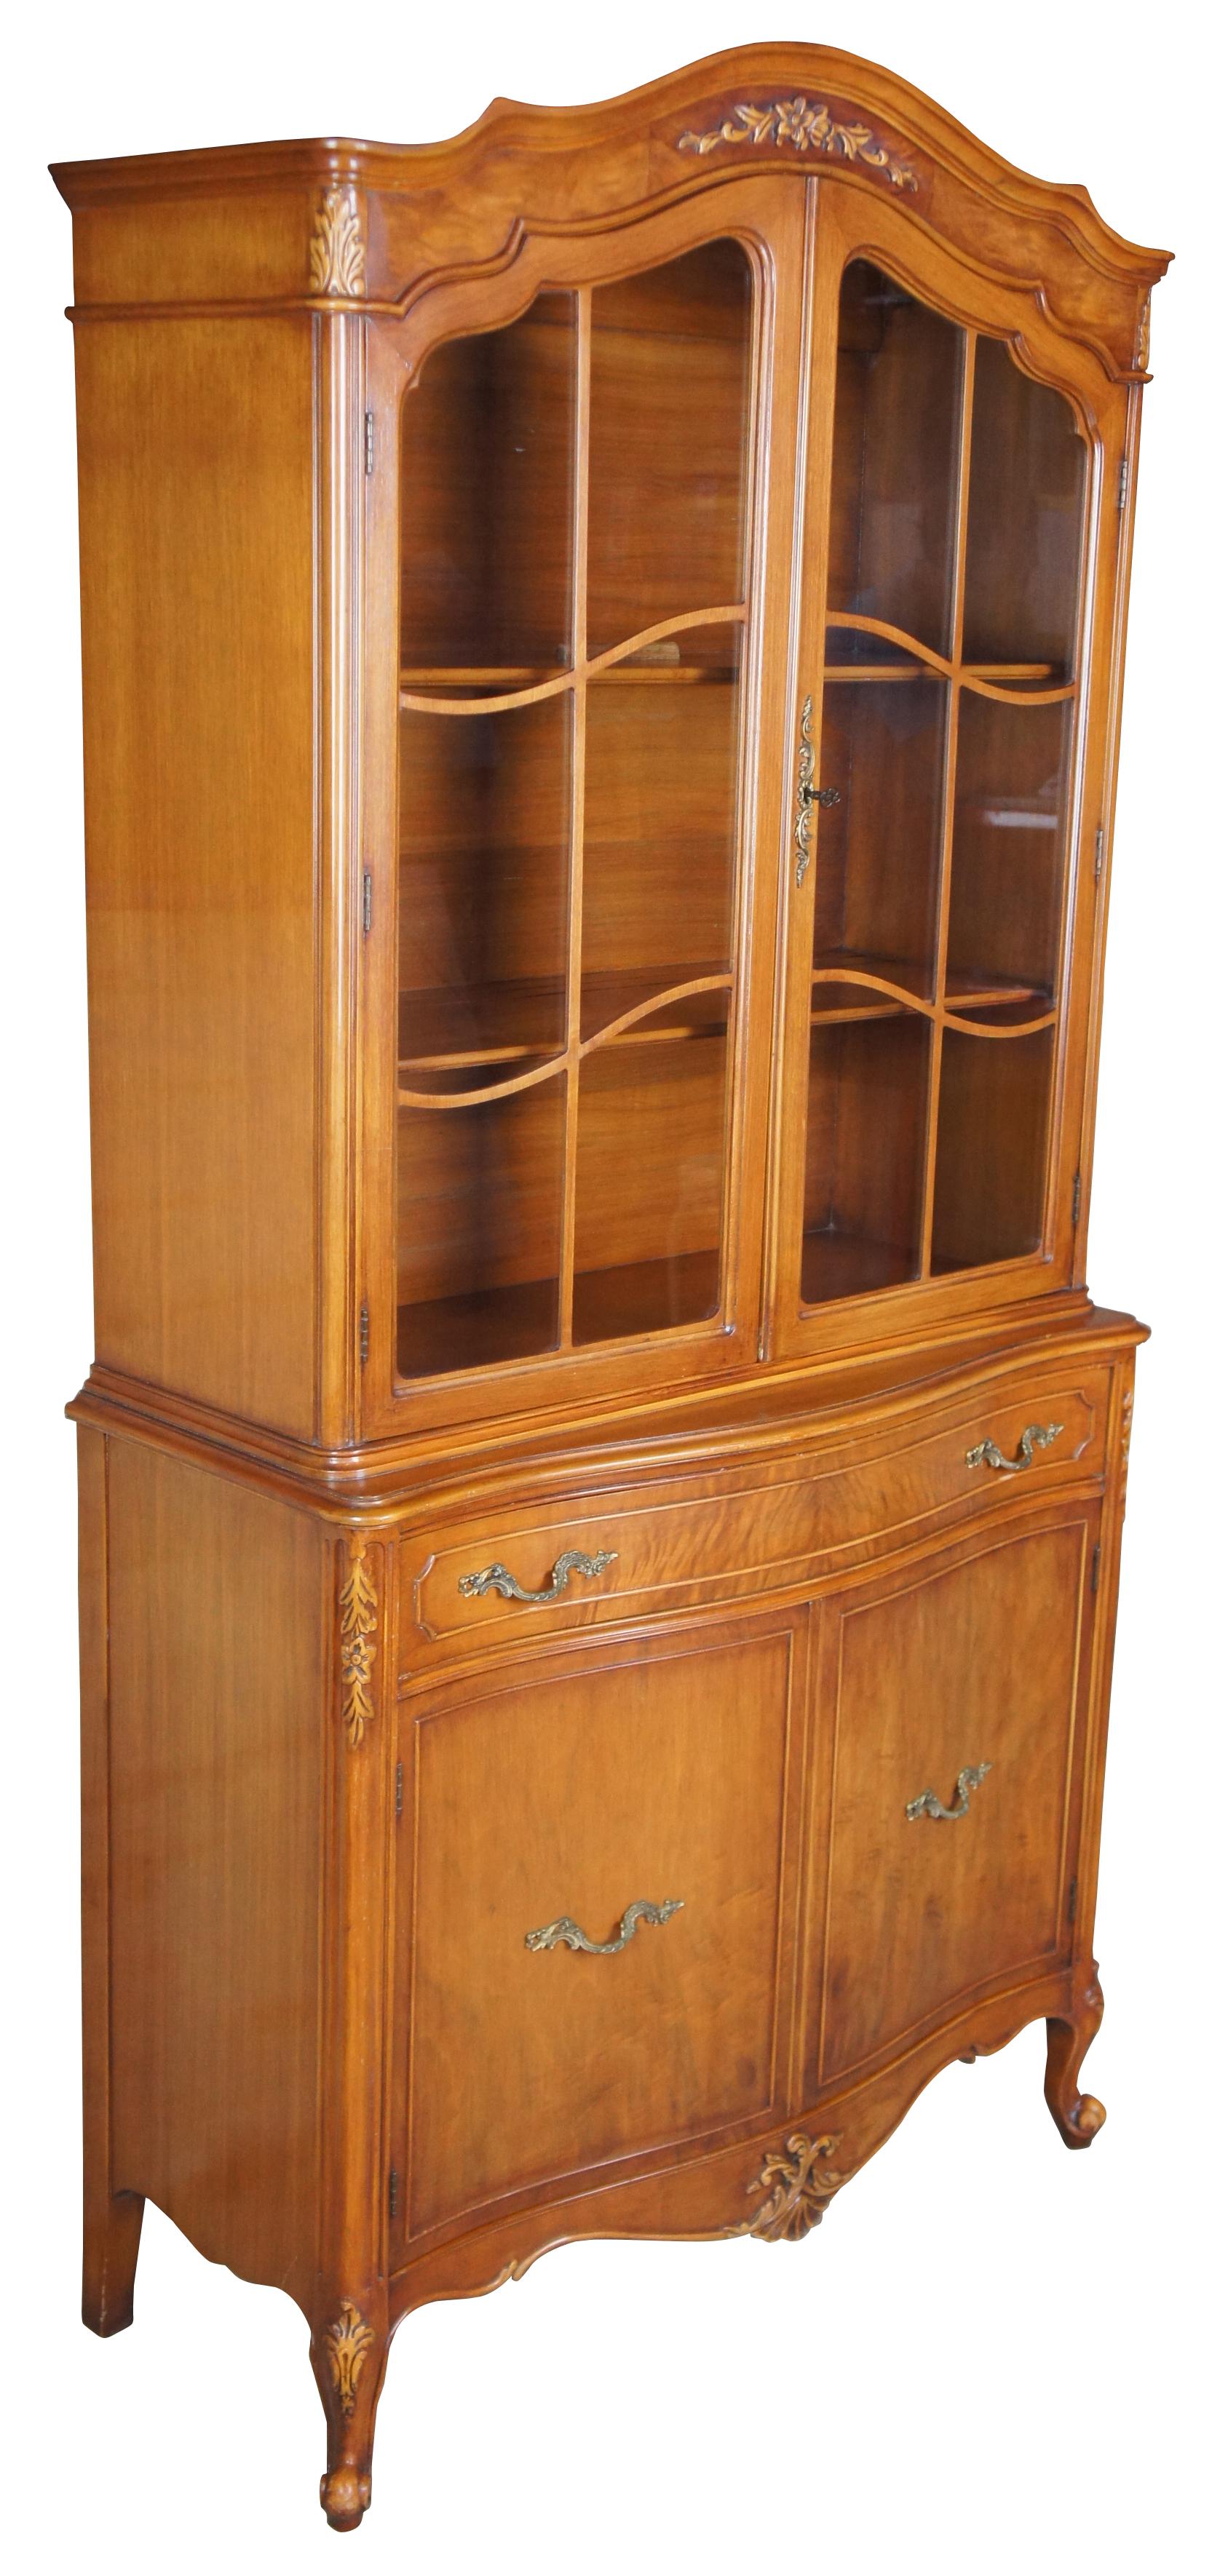 Mount Airy china cabinet, circa 1940s. Made from walnut with a serpentine front and crotch veneered drawers. Features carved accents, scalloped brass hardware and cabriole legs.

Mount Airy of North Carolina's roots go back to 1888 when the lumber